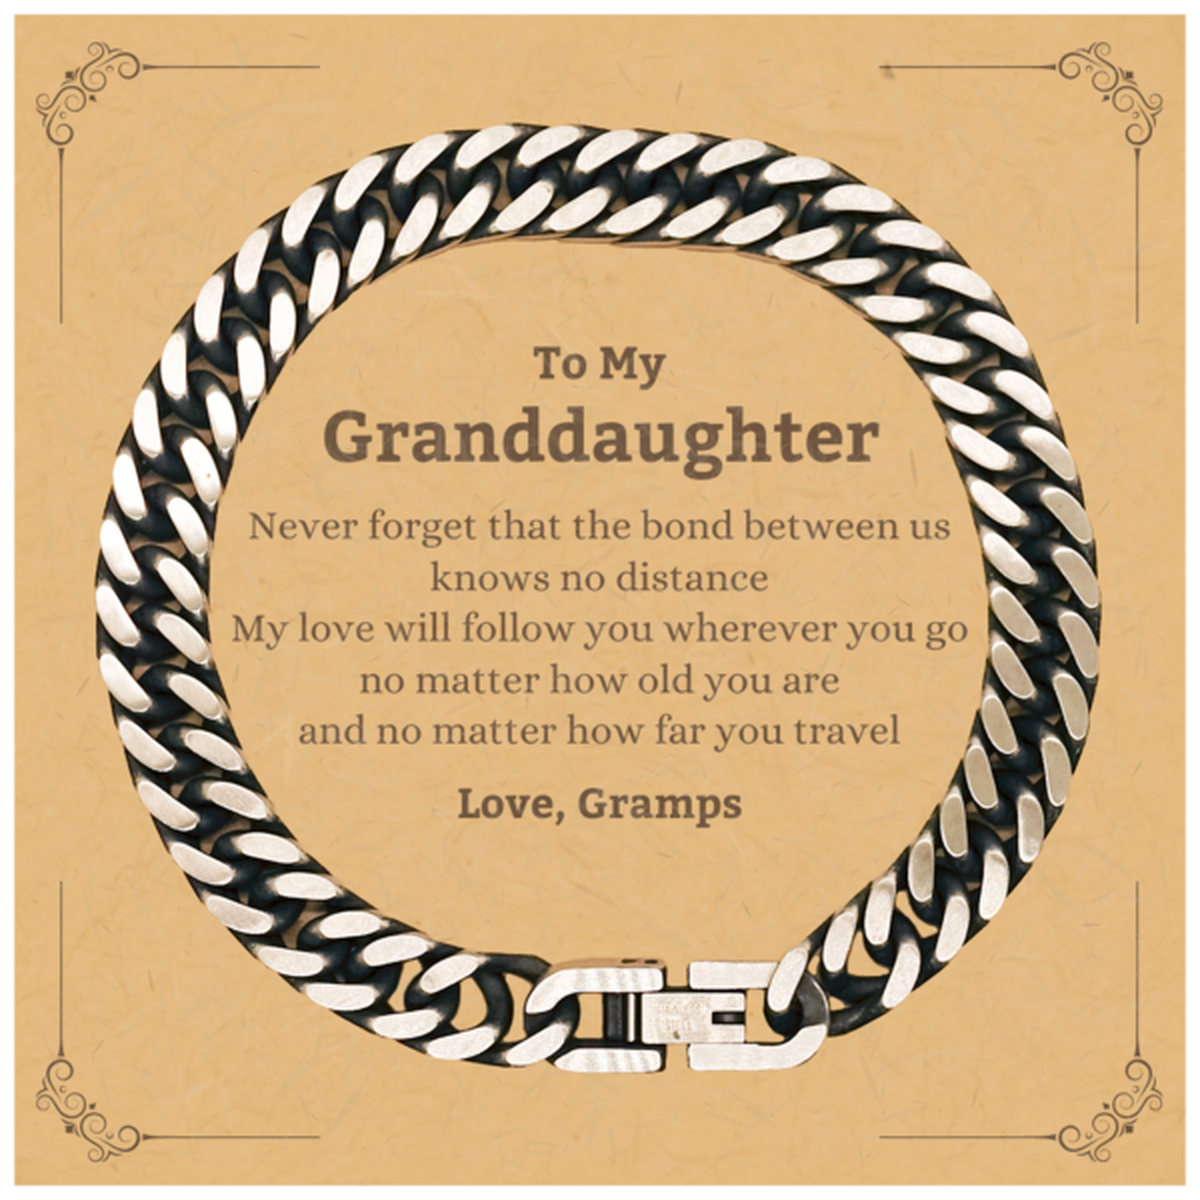 Granddaughter Birthday Gifts from Gramps, Adjustable Cuban Link Chain Bracelet for Granddaughter Christmas Graduation Unique Gifts Granddaughter Never forget that the bond between us knows no distance. Love, Gramps